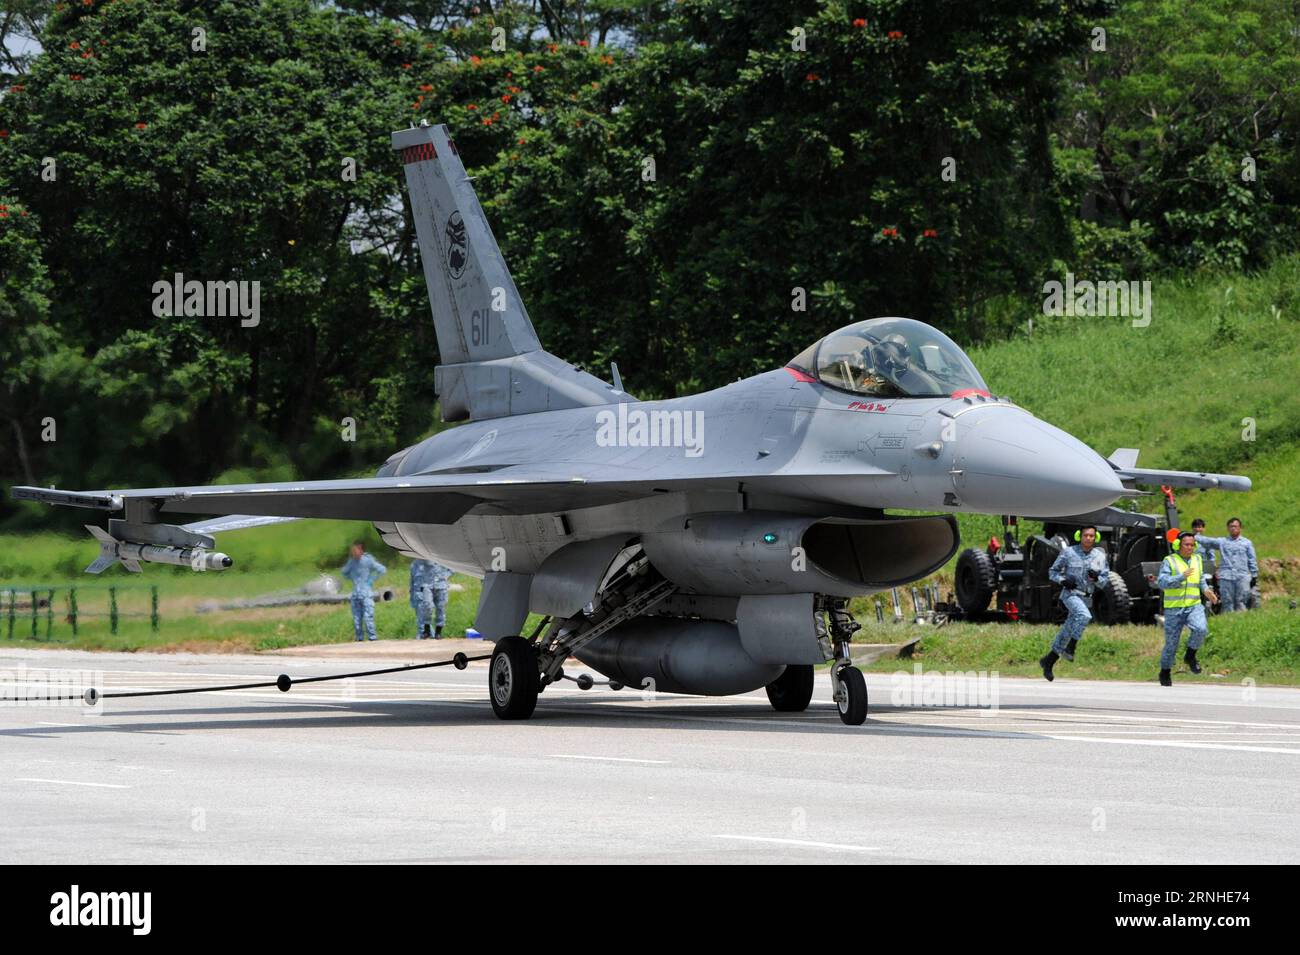 An F-16 fighter plane of the Republic of Singapore Air Force (RSAF) lands during a rehearsal of exercise Torrent on Singapore s Lim Chu Kang road, Nov. 12, 2016. The Republic of Singapore Air Force (RSAF) Sunday conducted exercise Torrent, in which a public road was converted into a runway for aircraft take-off and landing. The alternate runway exercise, which was last conducted in 2008 and now is in its seventh edition, aims to increase RSAF s aircraft take-off and landing capability. ) (sxk) SINGAPORE-RSAF-EXERCISE TORRENT-REHEARSAL ThenxChihxWey PUBLICATIONxNOTxINxCHN   to F 16 Fighter Plan Stock Photo